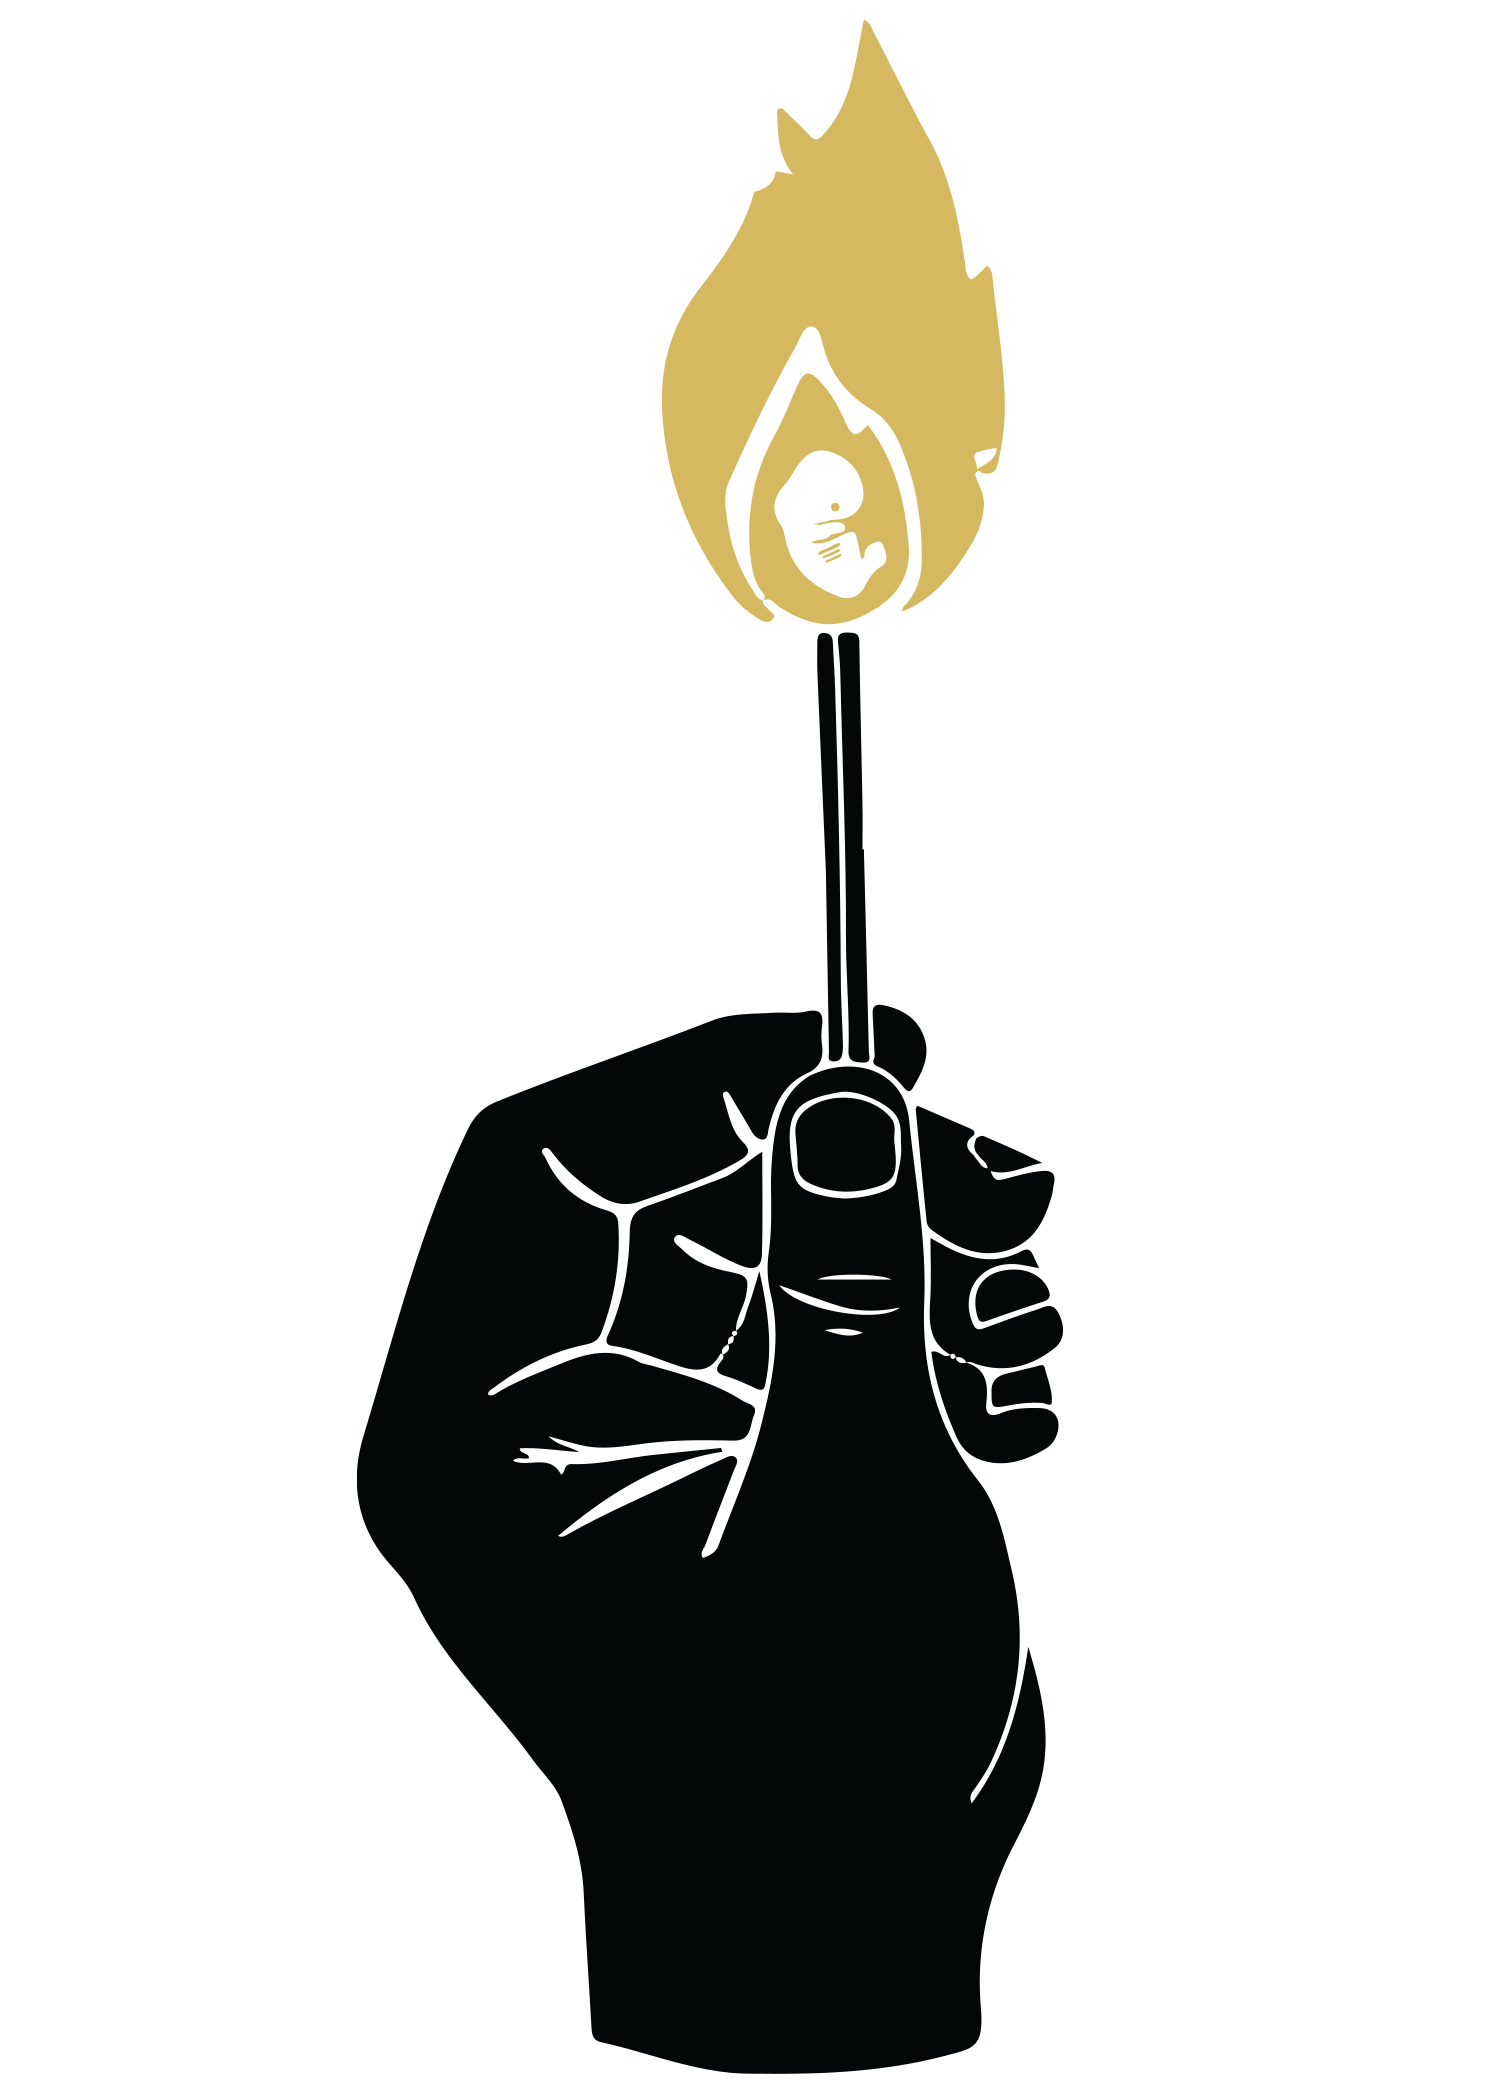 illustration of a hand holding a flame with a depiction of a womb and fetus inside